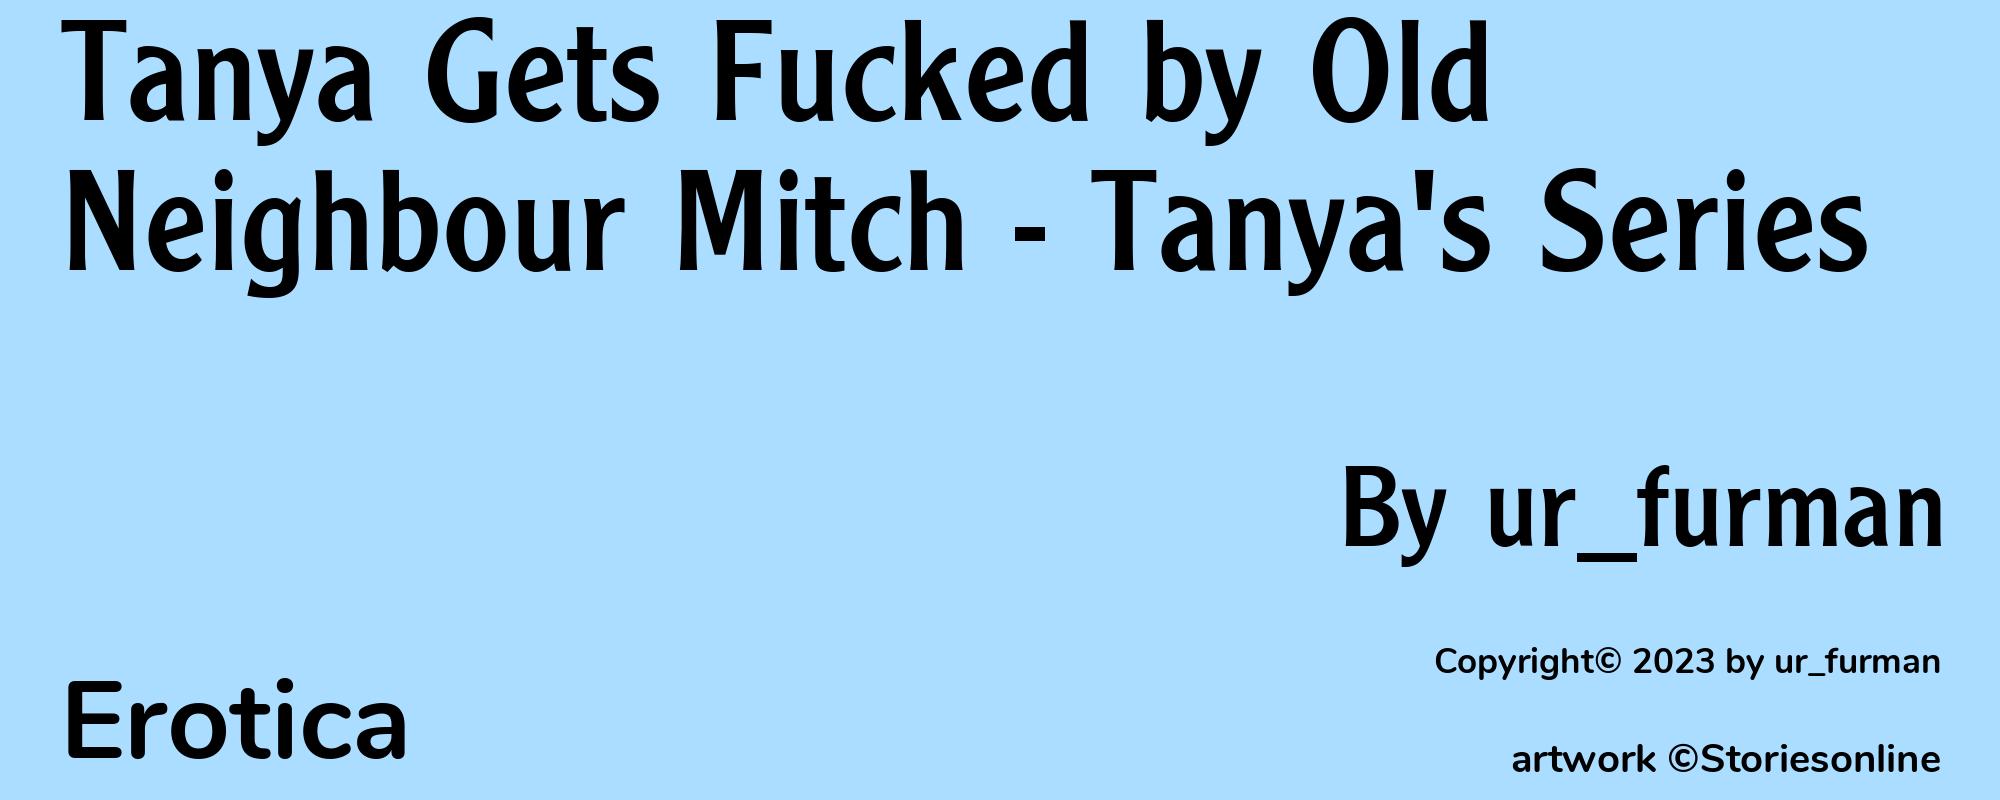 Tanya Gets Fucked by Old Neighbour Mitch - Tanya's Series - Cover